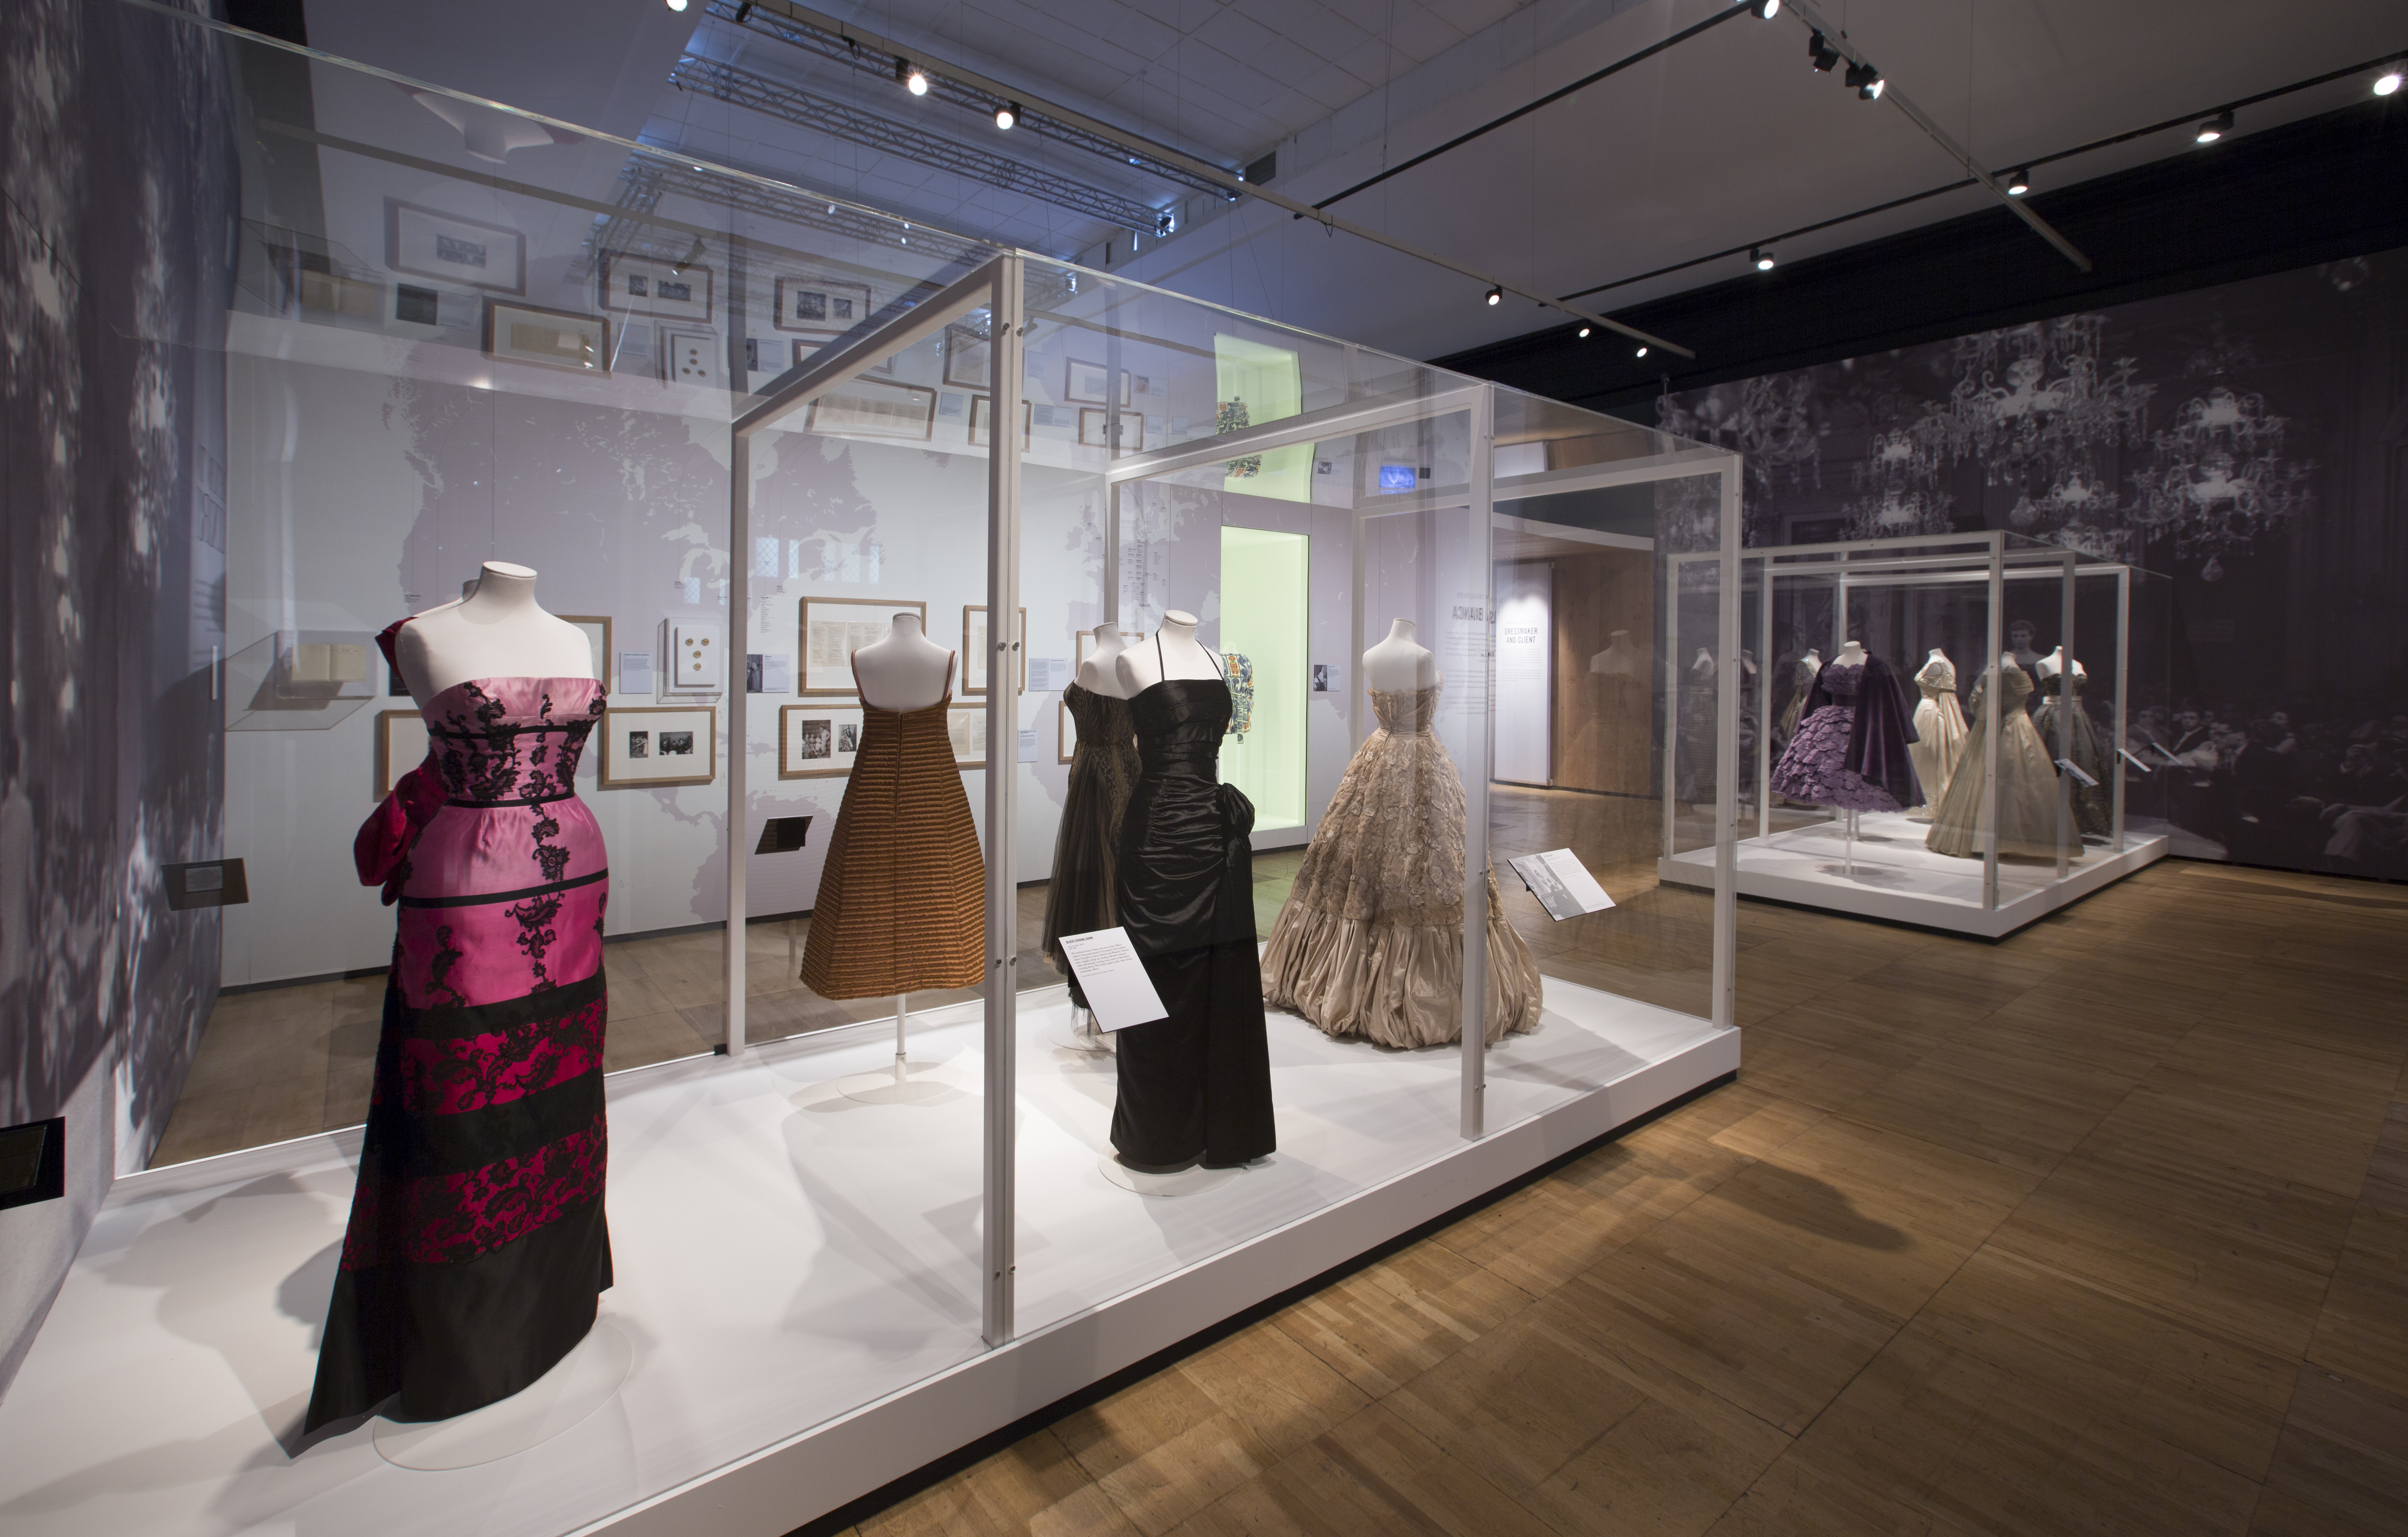 Africa Fashion exhibition at the Victoria and Albert Museum, London. Photo  Credit V&A Museum - University of Fashion Blog